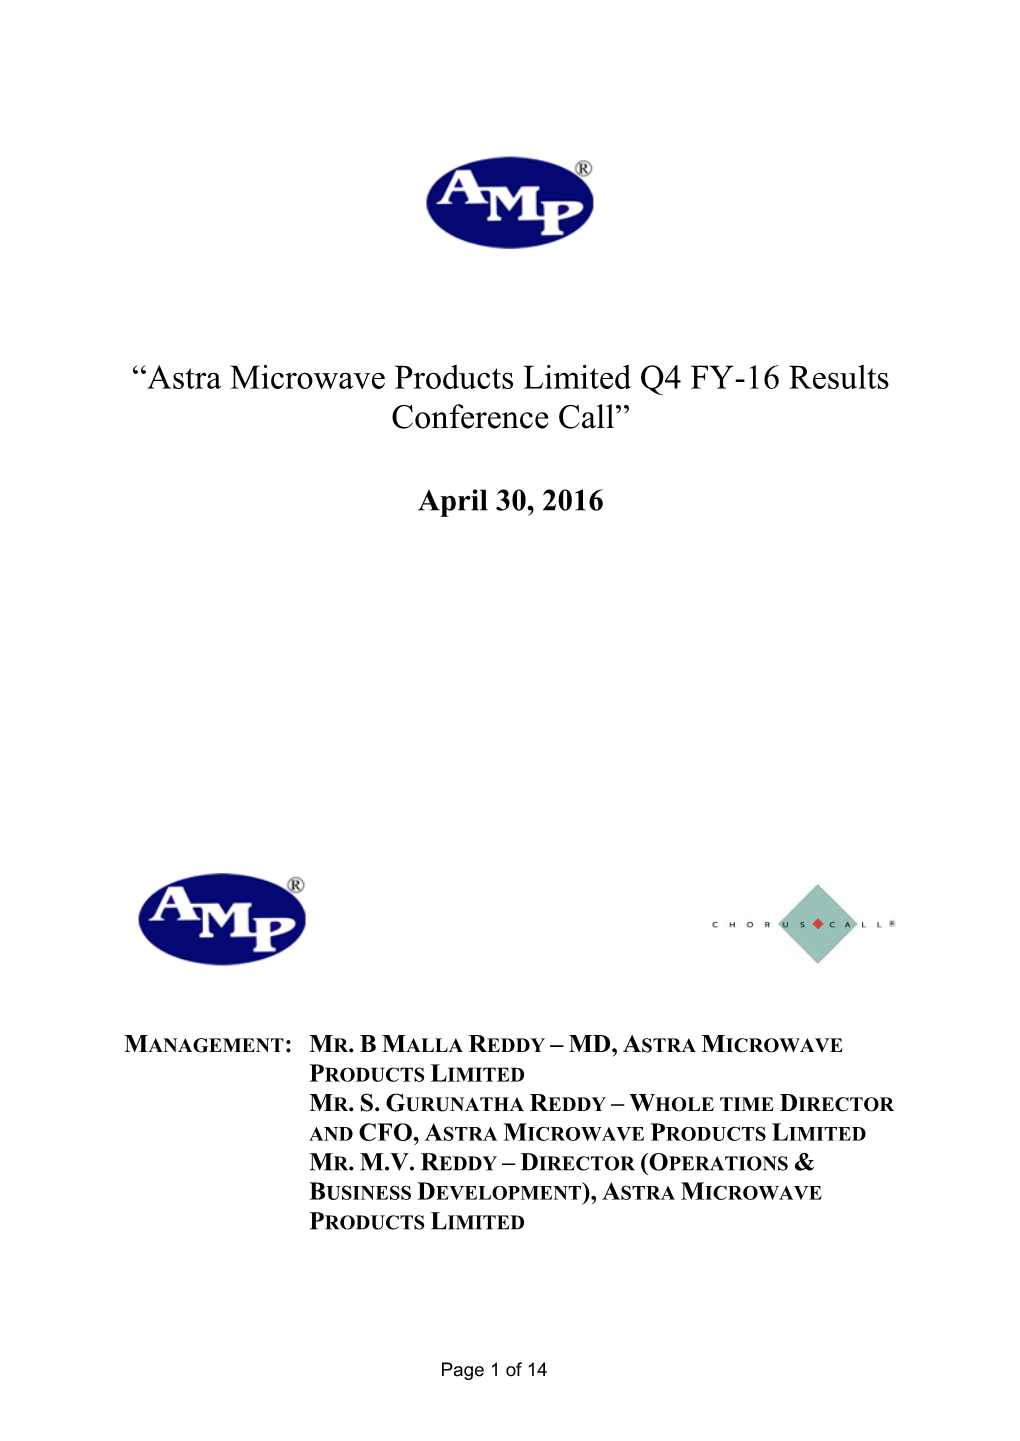 “Astra Microwave Products Limited Q4 FY-16 Results Conference Call”